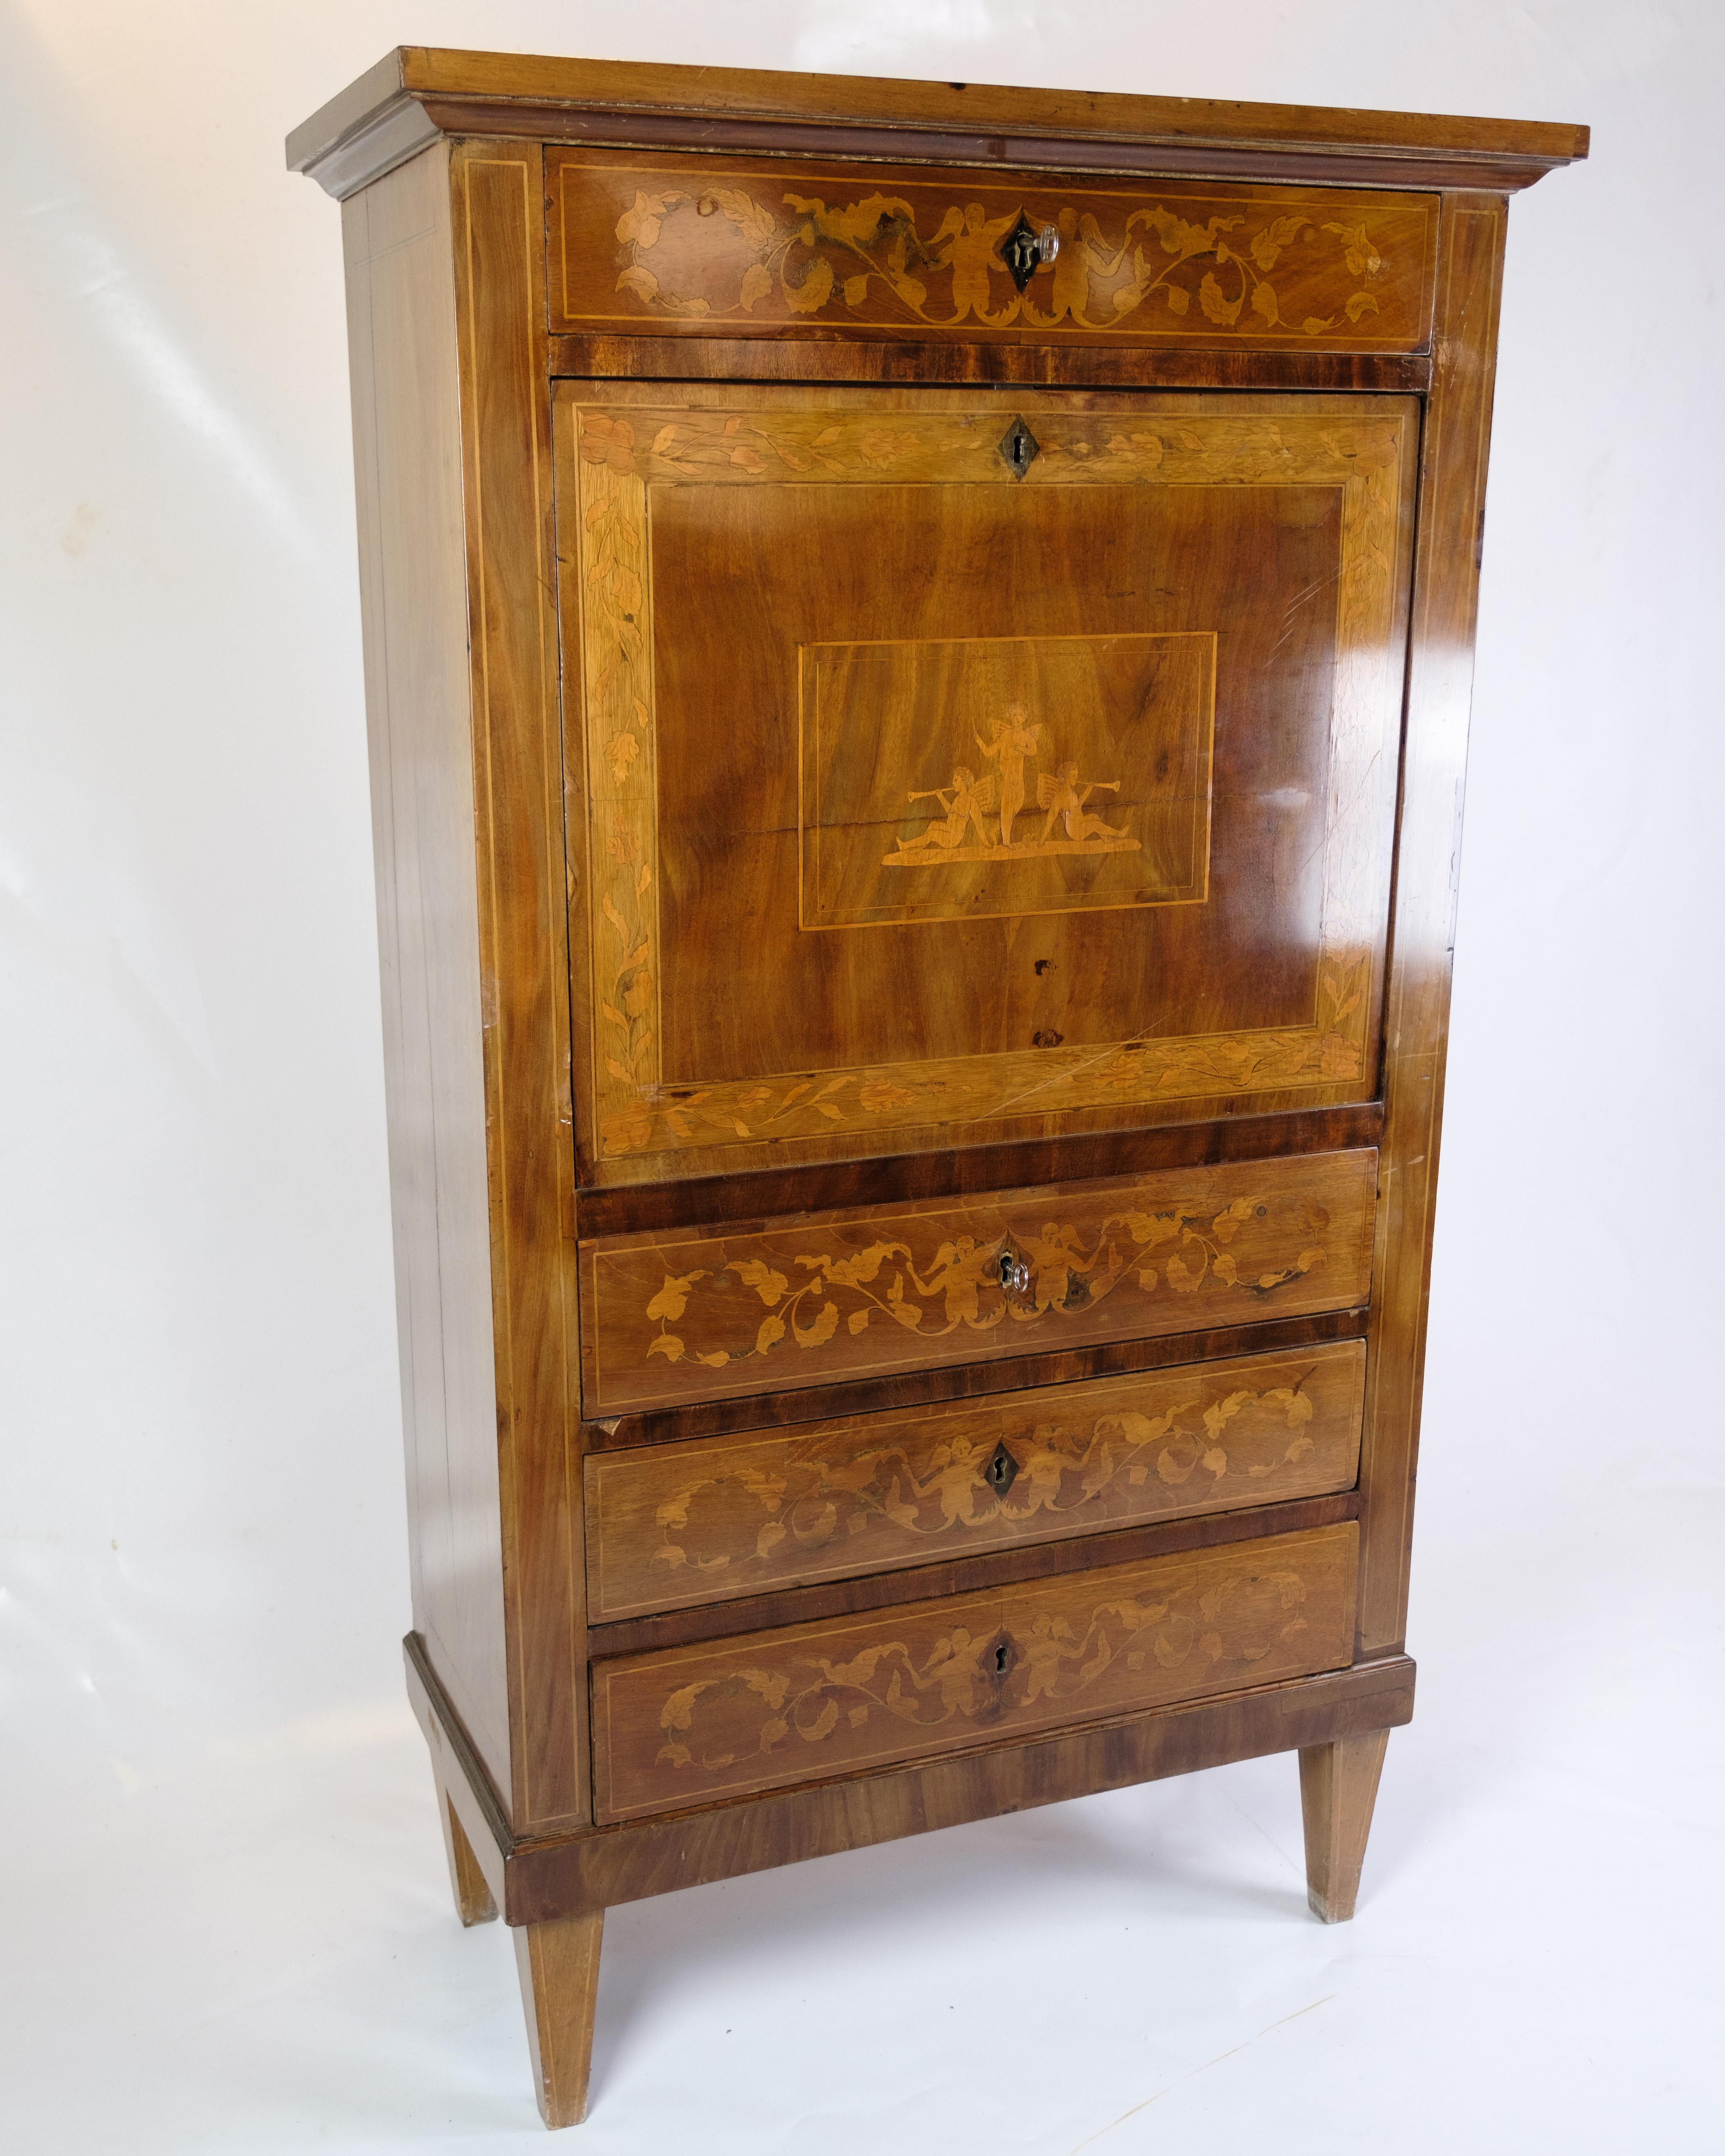 This impressive Empire style secretary from the year 1820 is a true masterpiece of craftsmanship and aesthetic beauty. Hand-polished mahogany wood gives the secretary an elegant and luxurious look that is characteristic of the furniture art of the